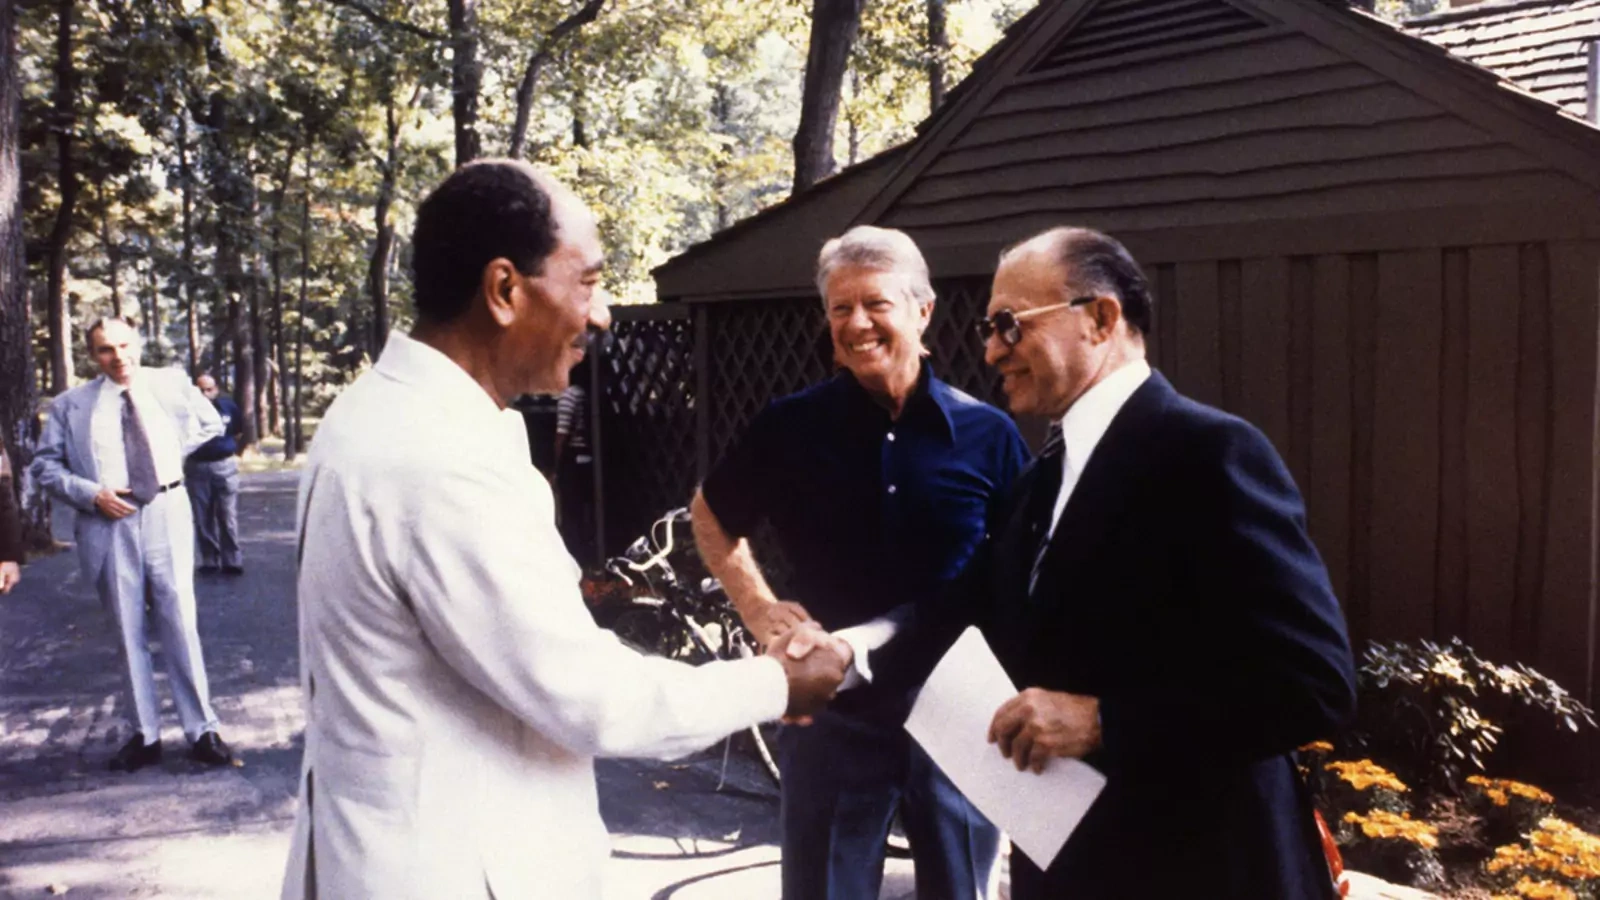 Israeli Prime Minister Menachem Begin shakes hands with Egyptian President Anwar Sadat at the start of a trilateral meeting with U.S. President Jimmy Carter in 1978.